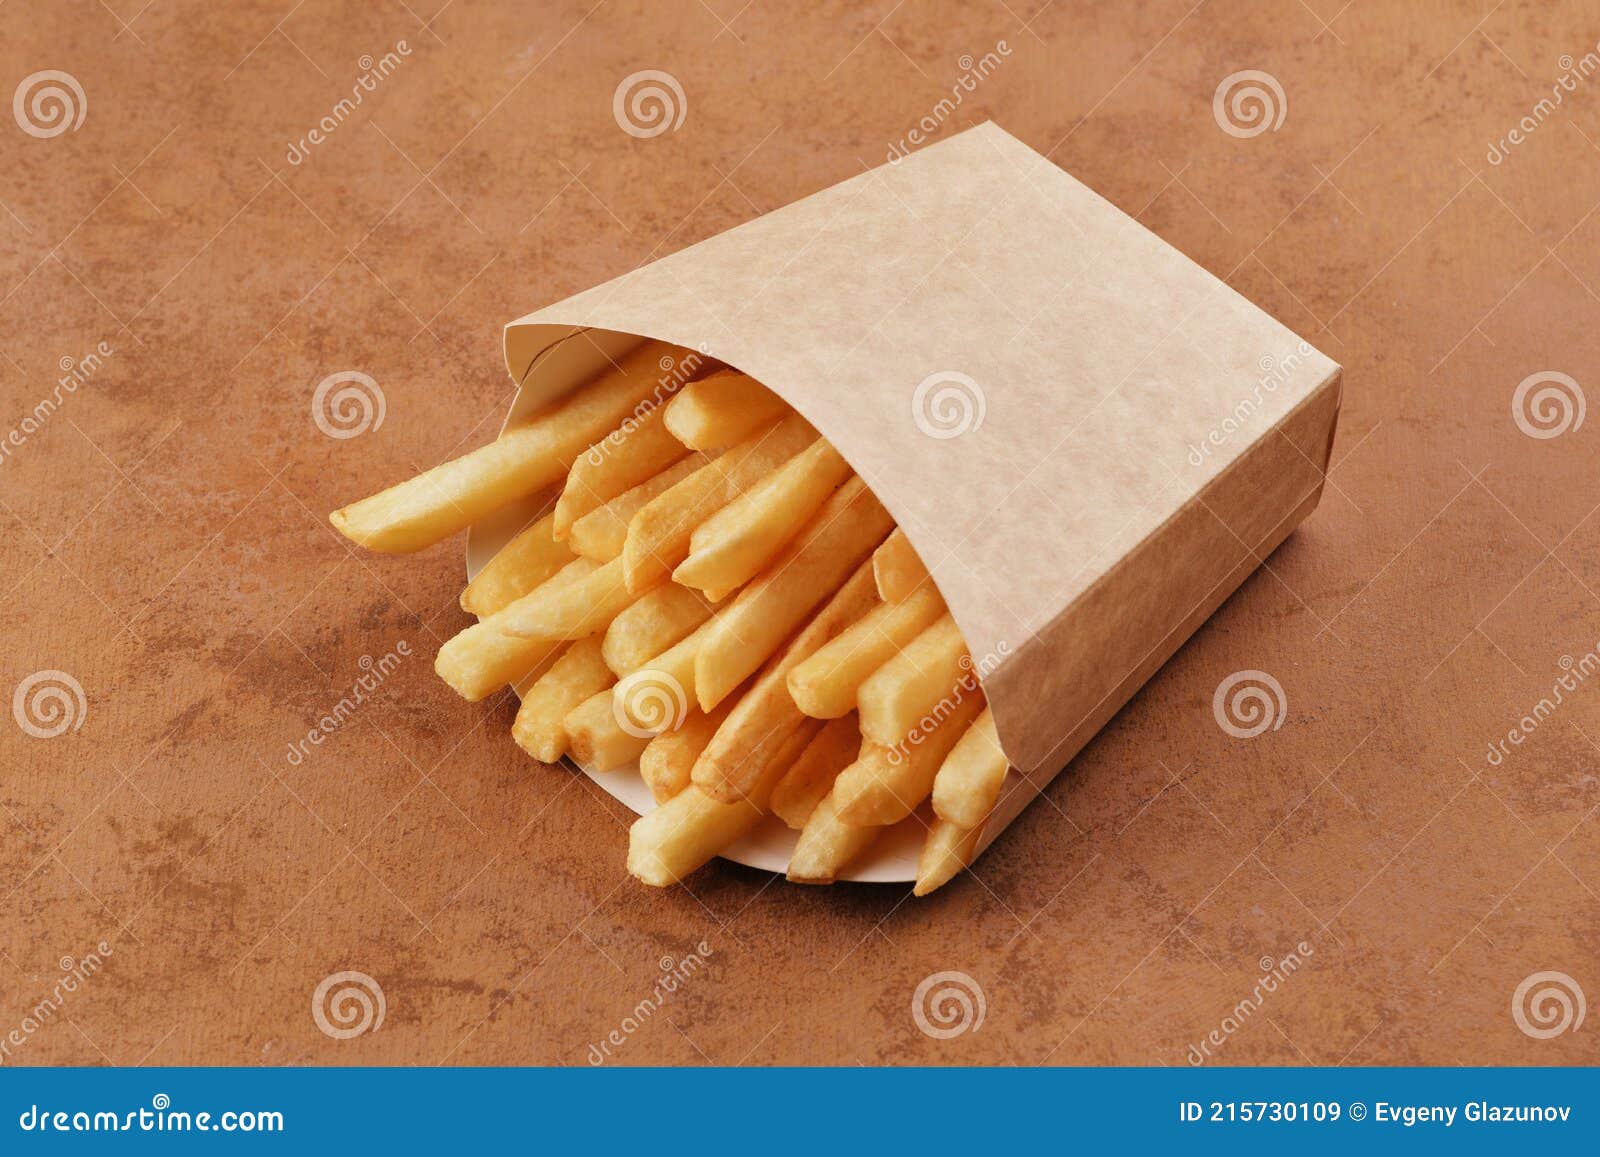 French Fries in a Brown Kraft Paper Bag. Fast Food. Food Paper Packaging  from Environmentally Friendly Materials Stock Image - Image of golden,  brown: 215730109